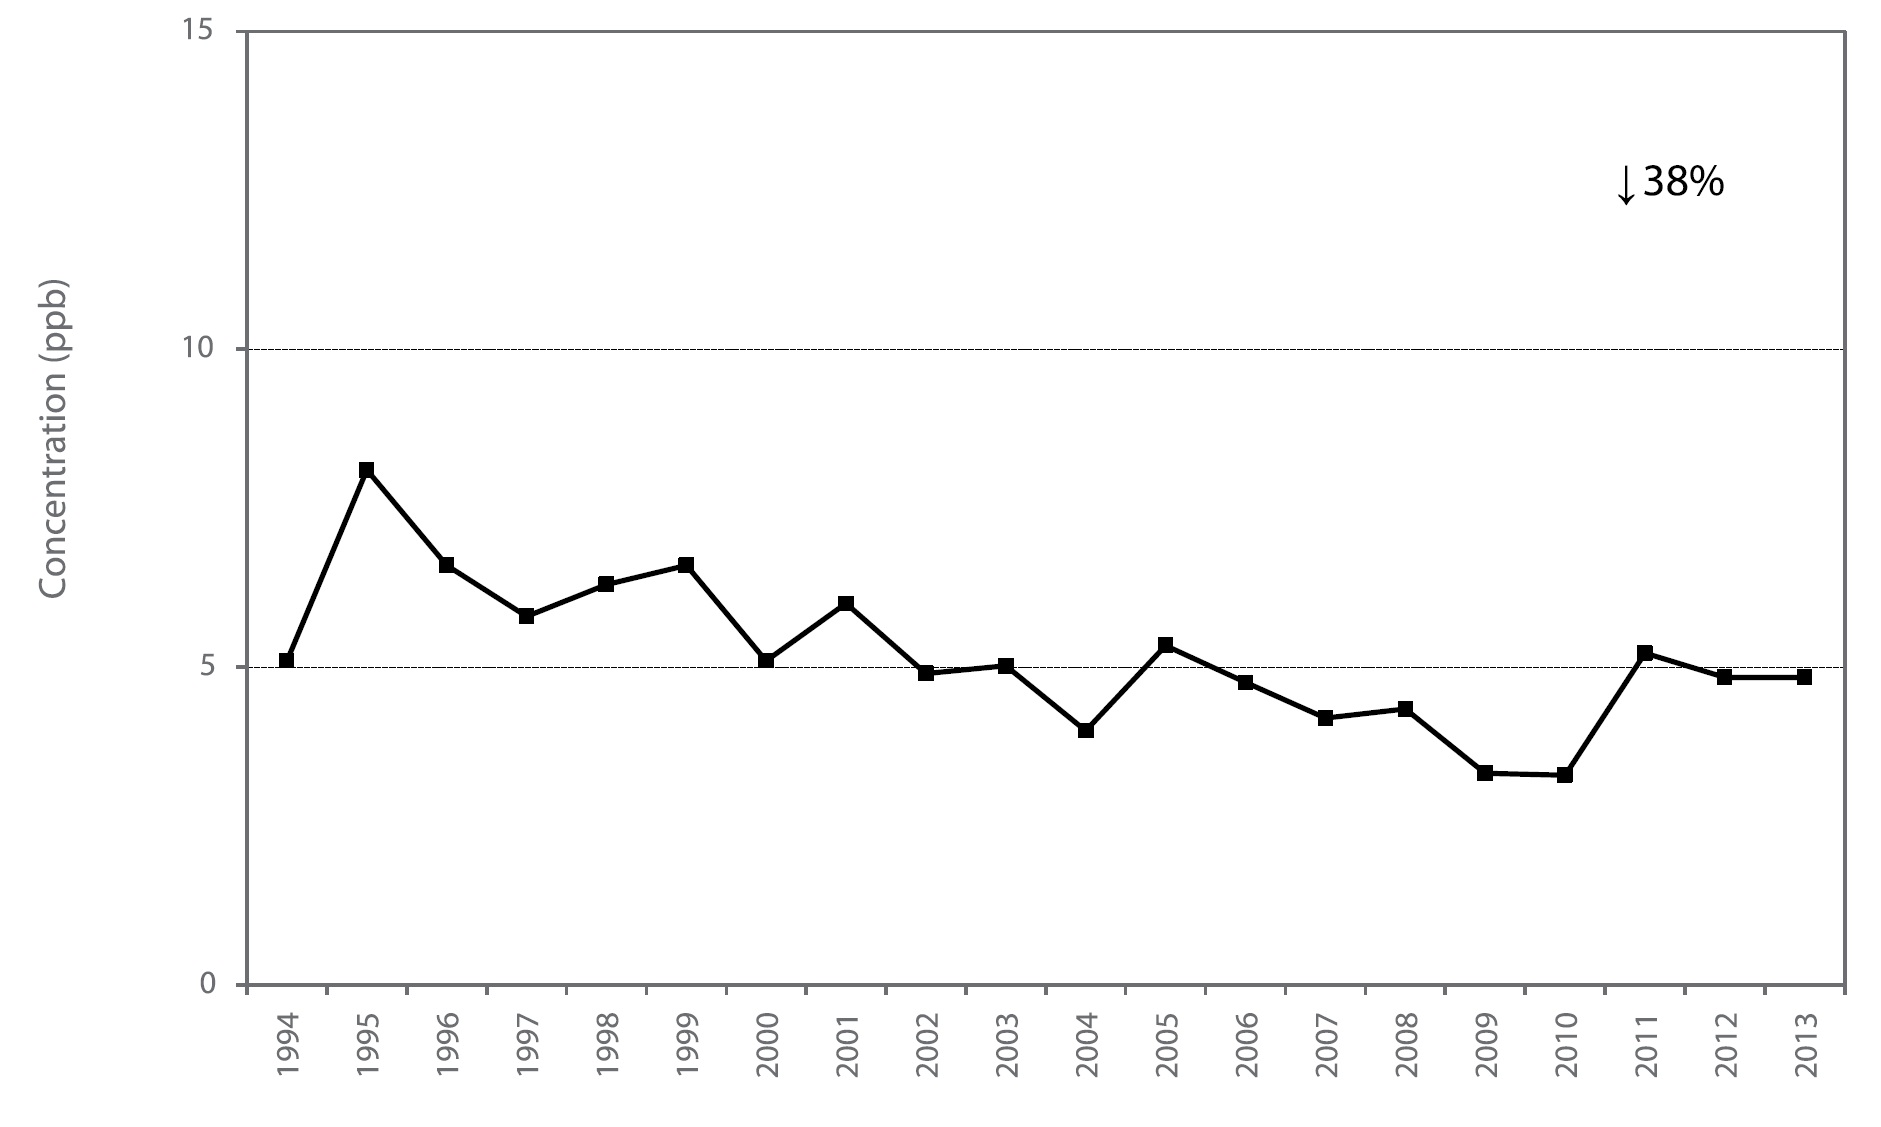 Figure A44 is a line chart displaying the sulphur dioxide annual mean at Hamilton Downtown from 1994 to 2013. Over this 20-year period, sulphur dioxide decreased 38%.